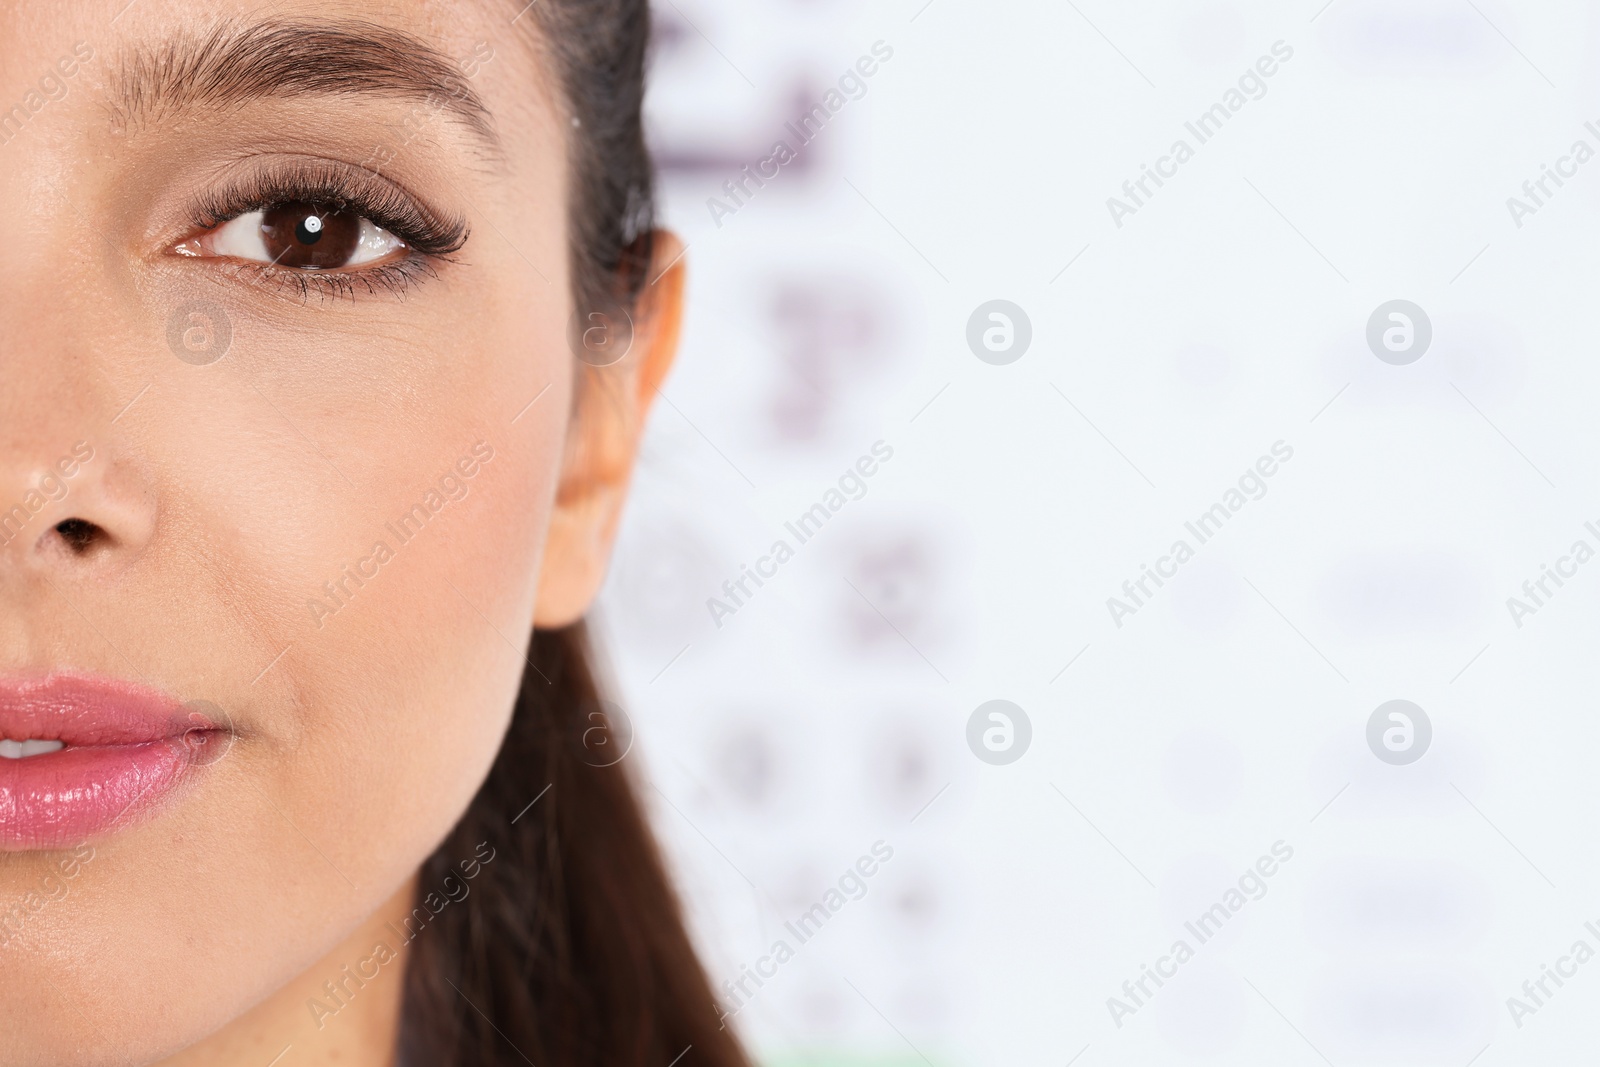 Photo of Closeup view of young woman and blurred eye chart on background. Space for text